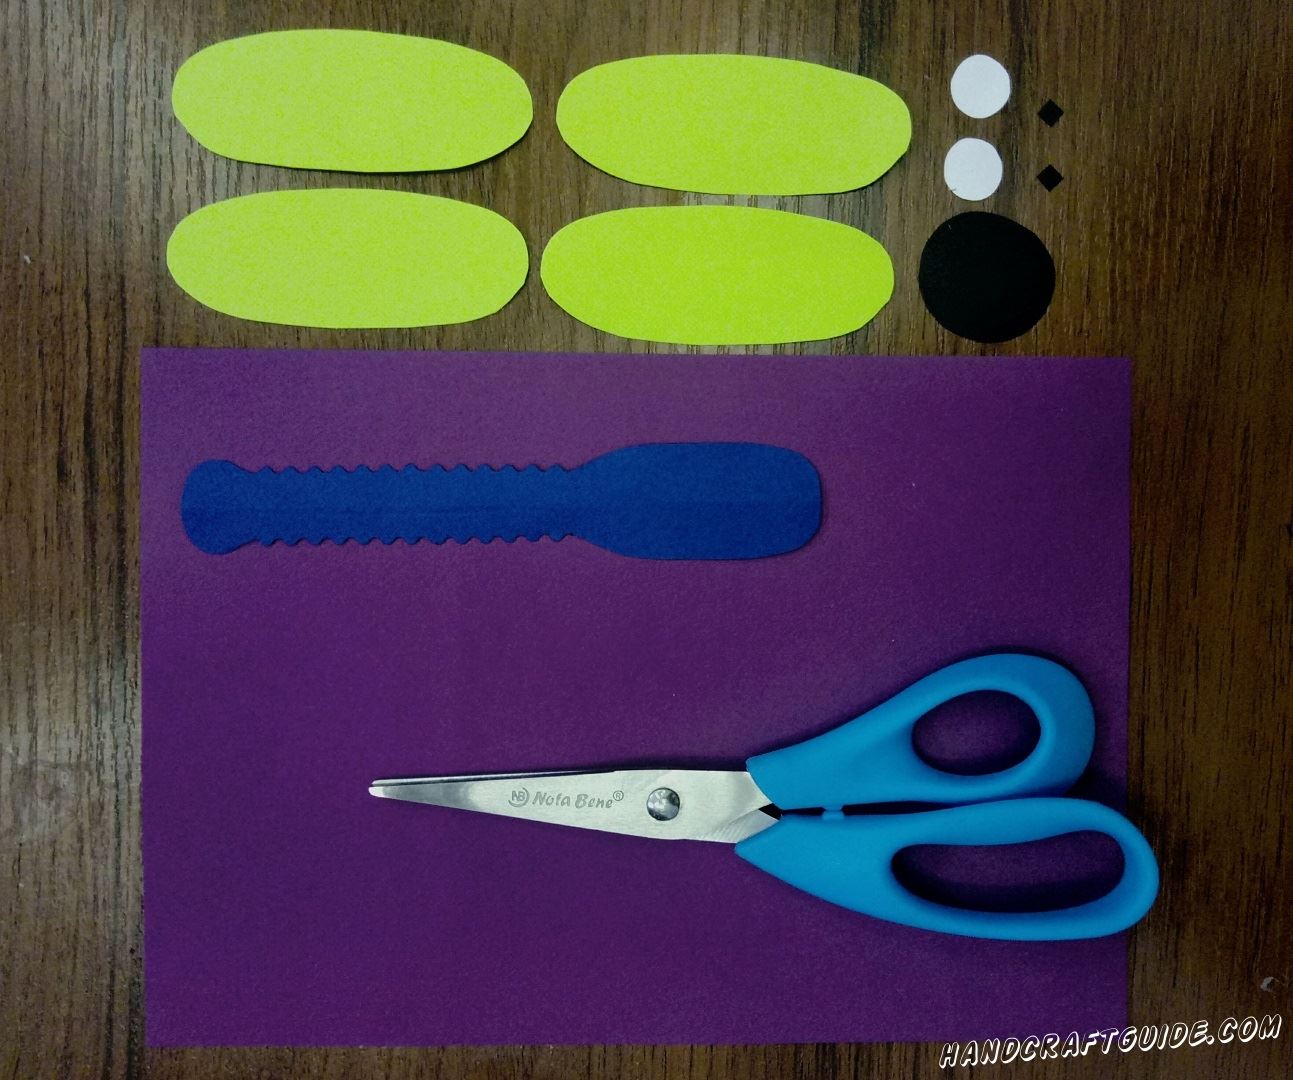 Cut all the necessary details out of color paper as shown in the photo.